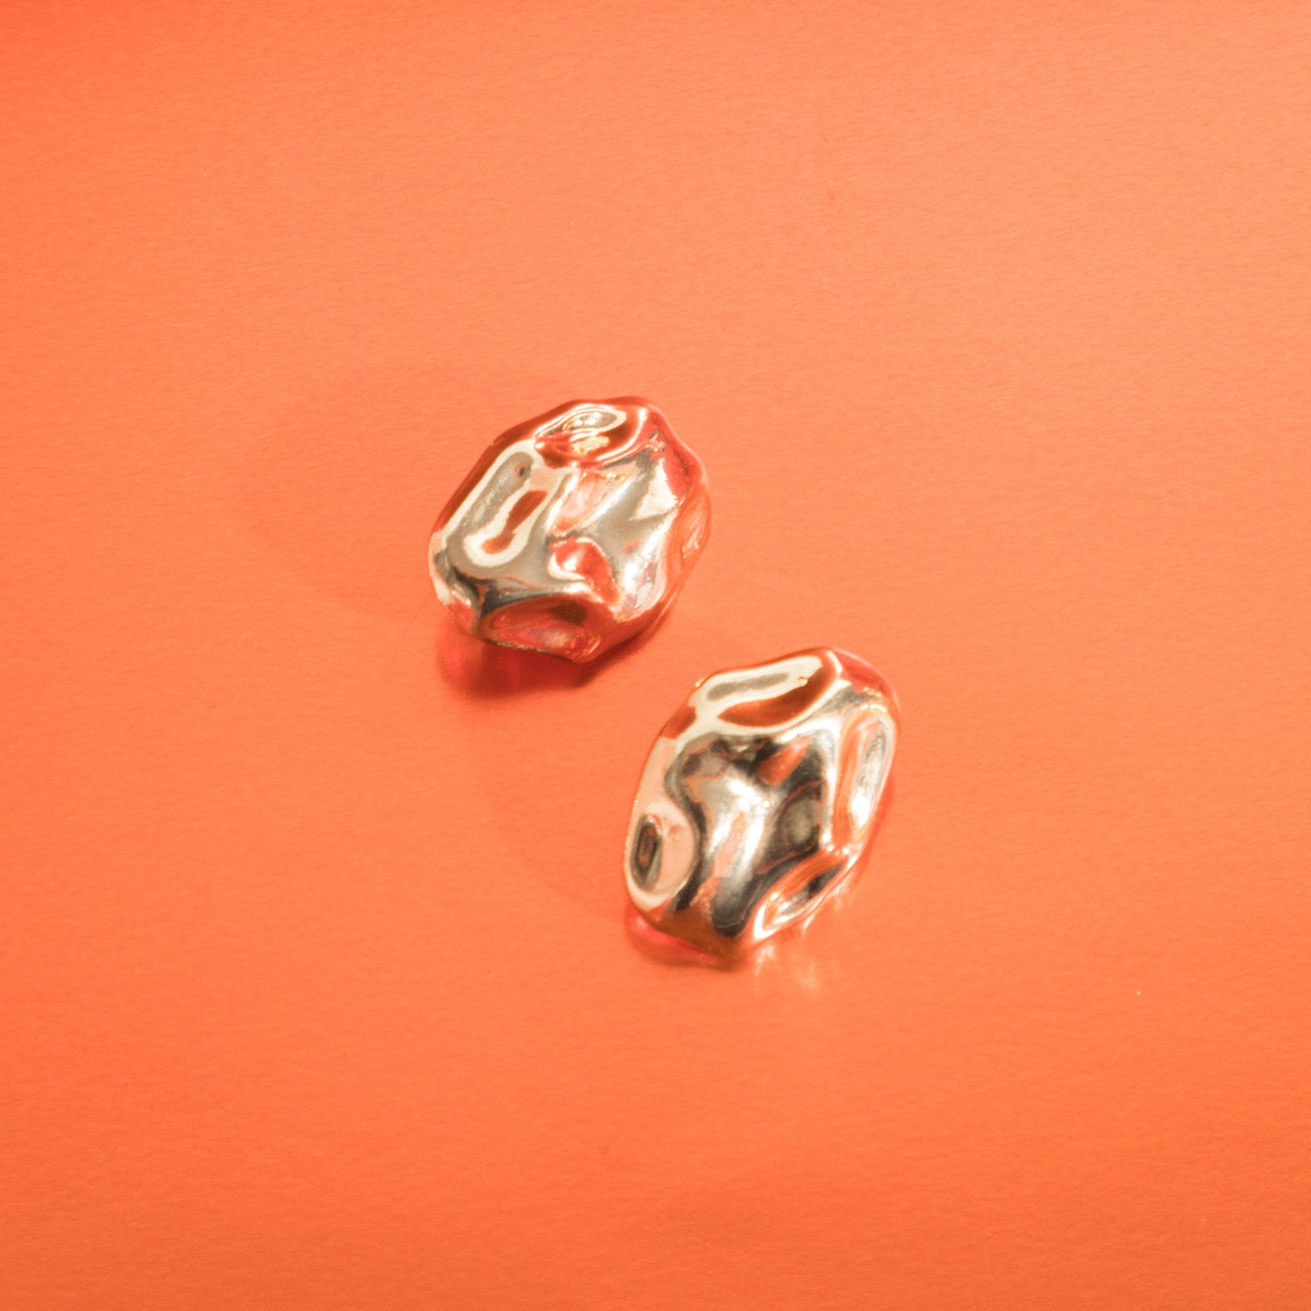 Image of the Amaya Clip On Earrings in Gold feature a secure padded clip-on closure type, making them suitable for all ear types.The average comfortable wear duration is 8-12 hours, and the Copper Alloy construction ensures a reliable and secure hold. The item is sold as one pair; adjustable rubber padding is included.